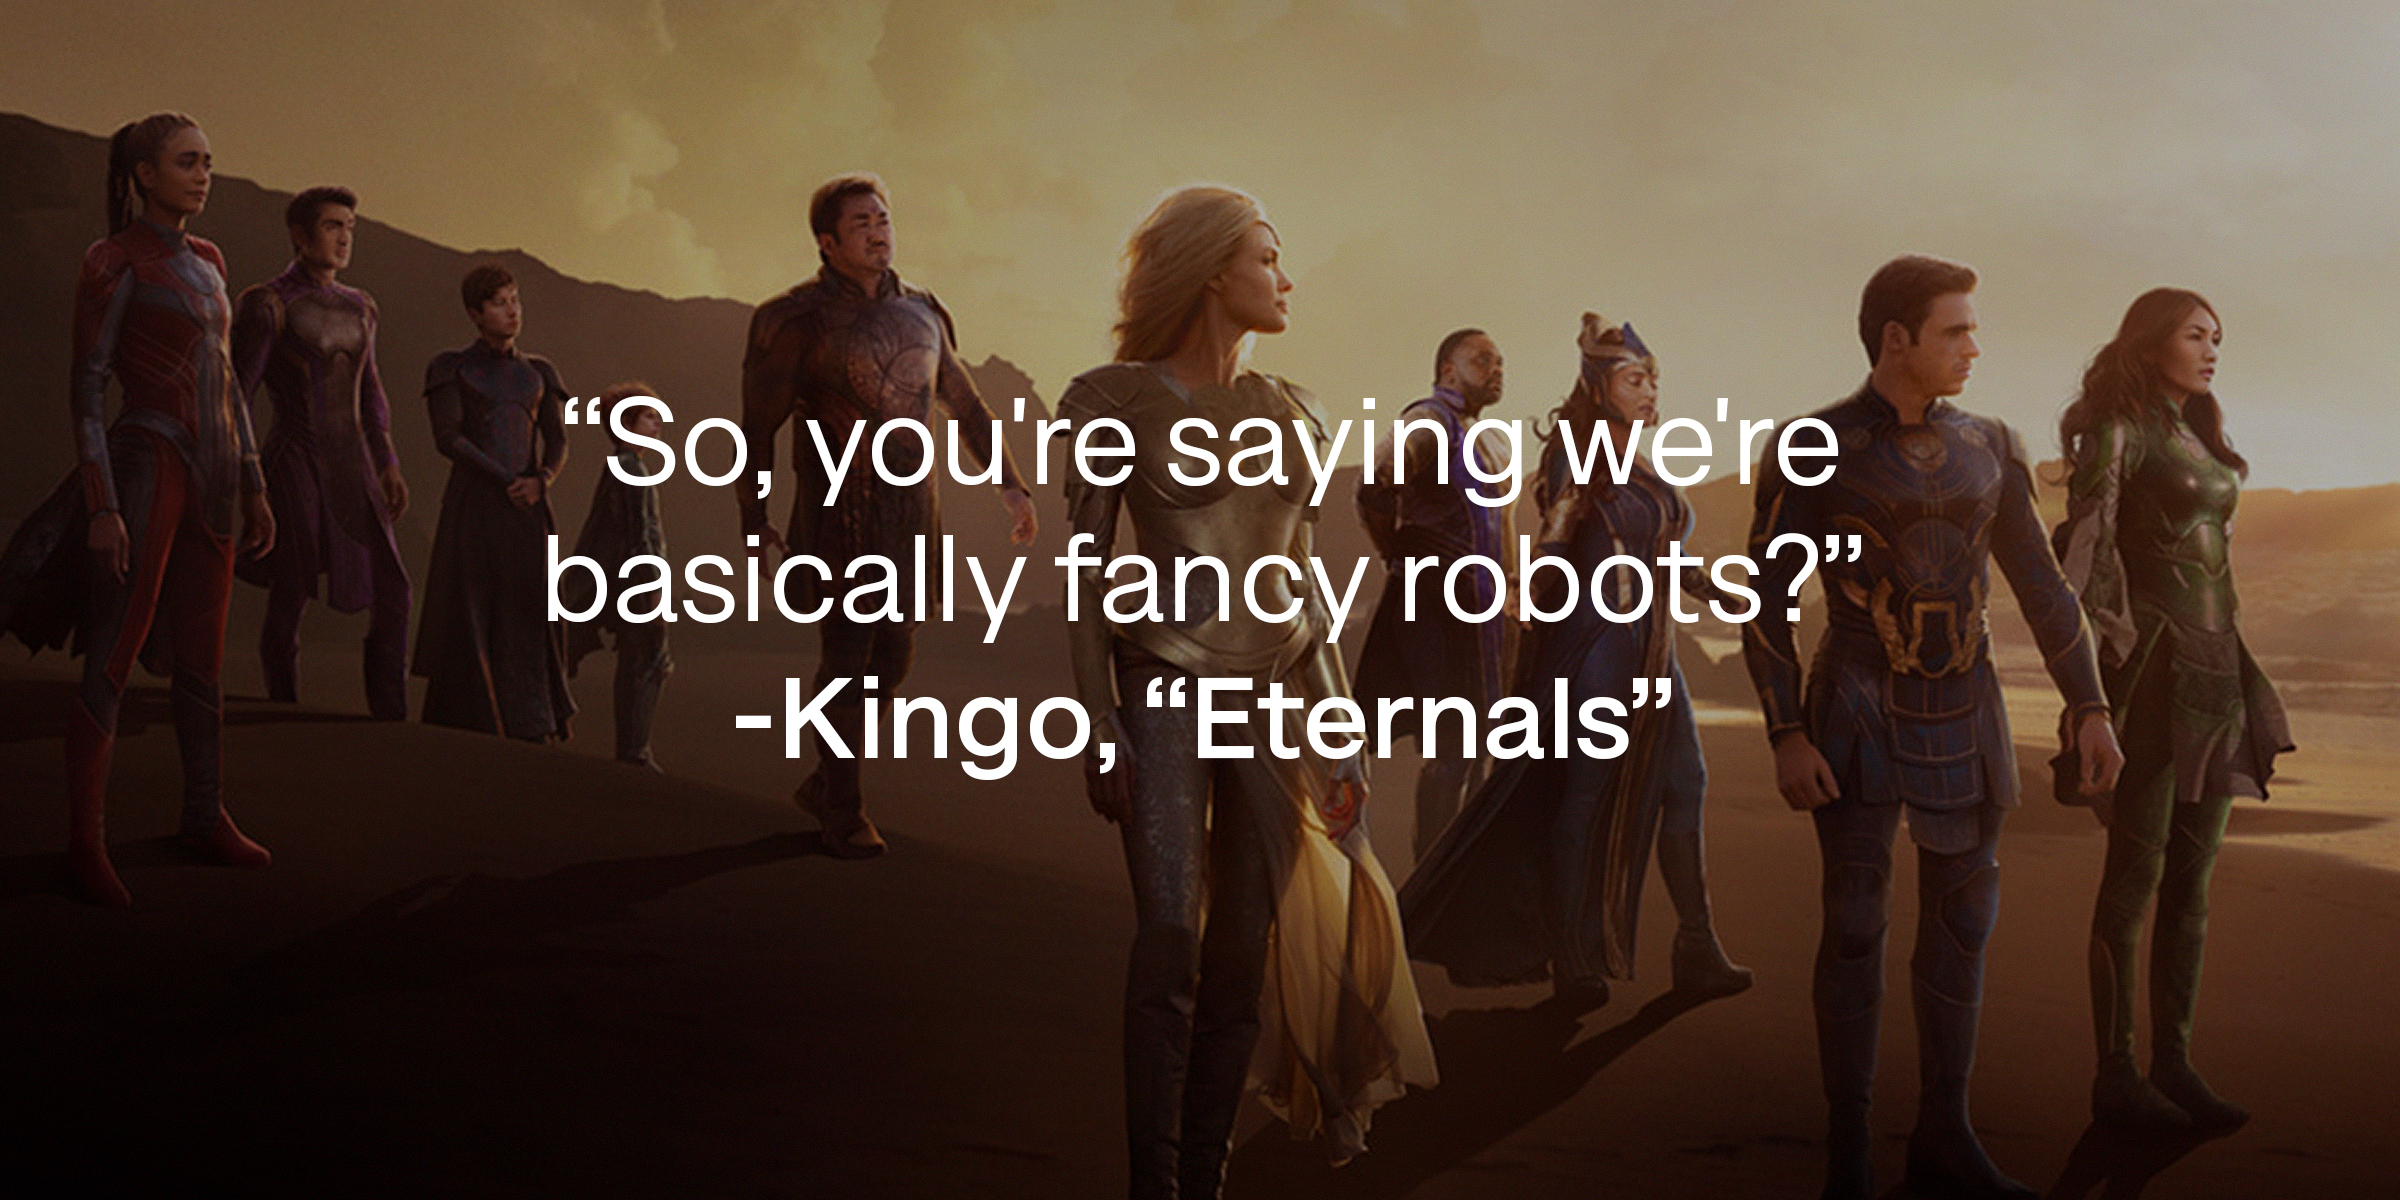 Kingo’s quote: "So, you're saying we're basically fancy robots?" | Source: Facebook.com/officialeternals